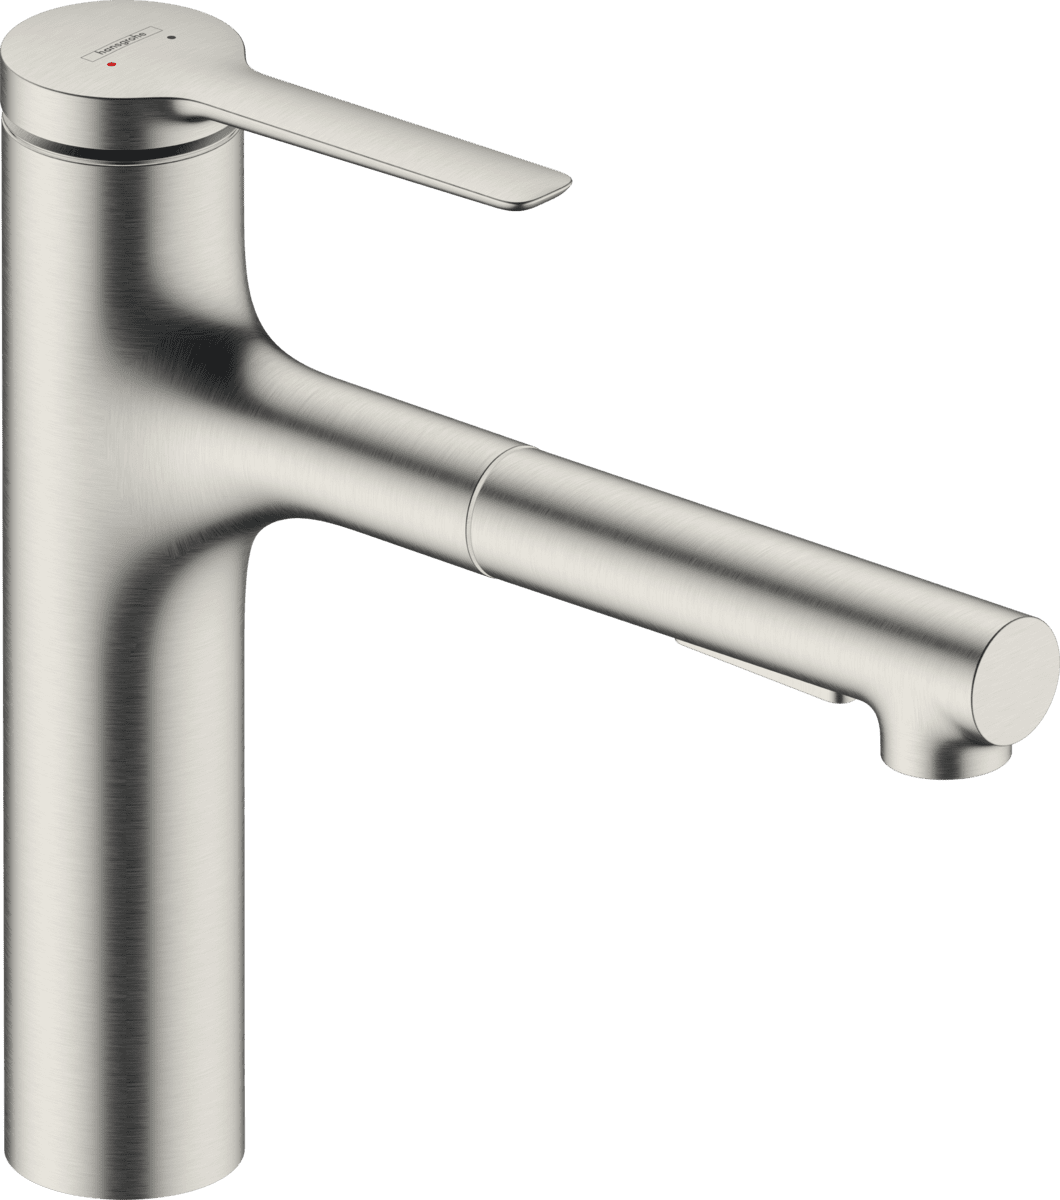 Зображення з  HANSGROHE Zesis M33 Single lever kitchen mixer, 160, pull-out spray, 2jet, sBox lite #74804800 - Stainless Steel Finish